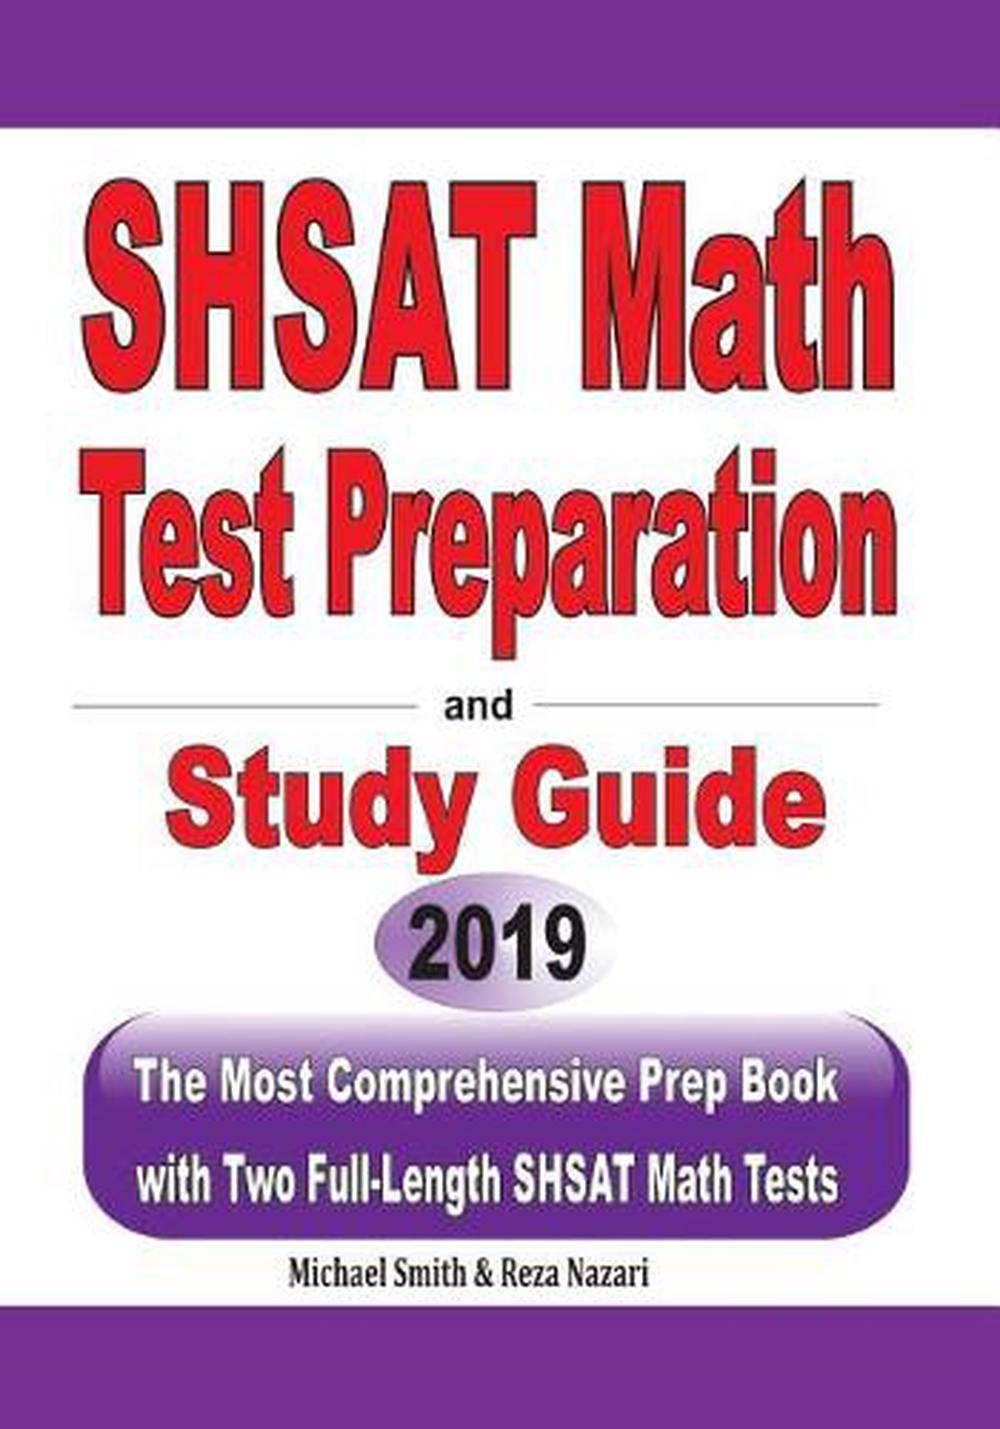 SHSAT Math Test Preparation and Study Guide The Most Comprehensive